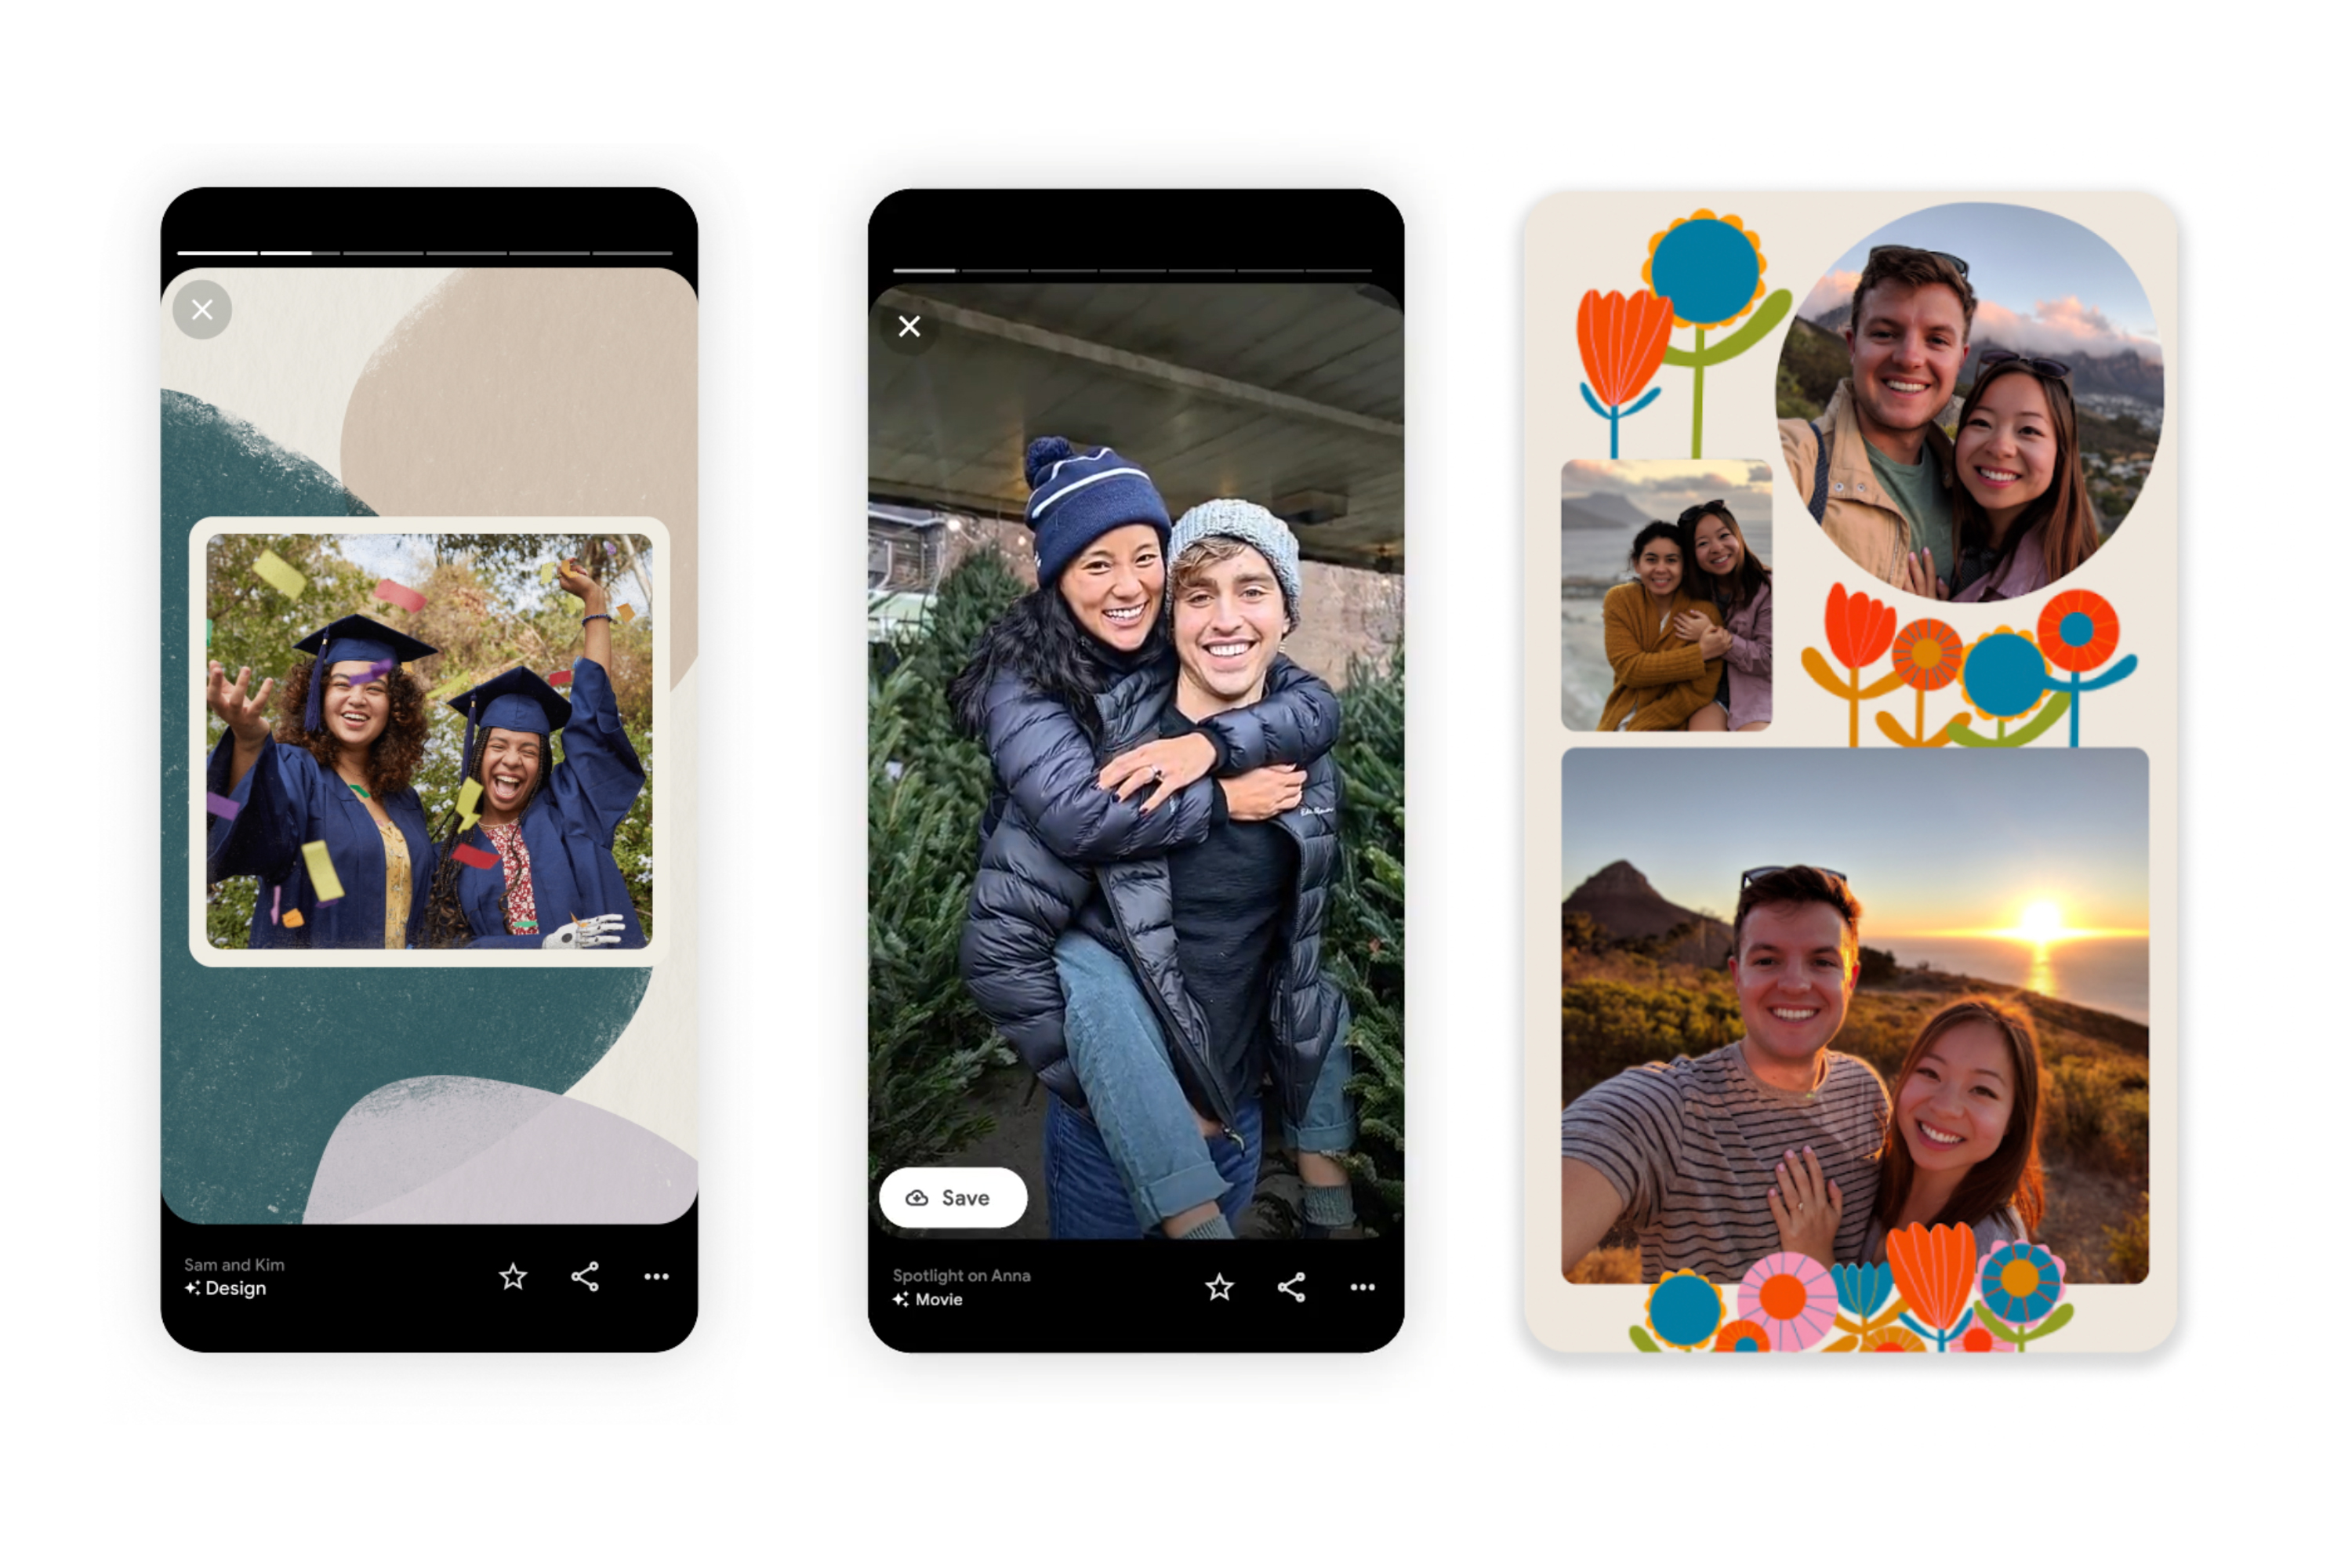 A redesigned Google Photos, built for your life's memories